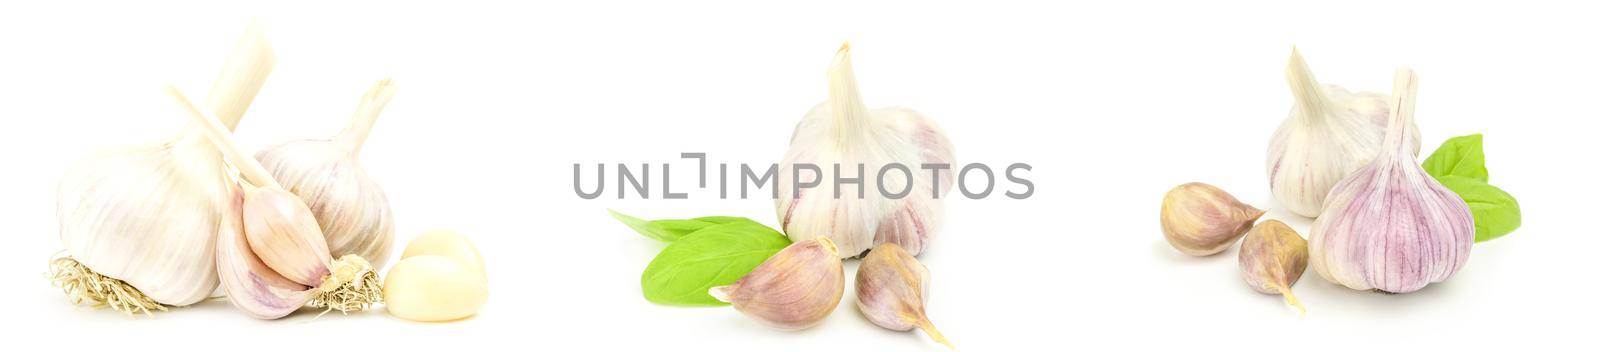 Set of Garlic isolated on a white background cutout by Proff